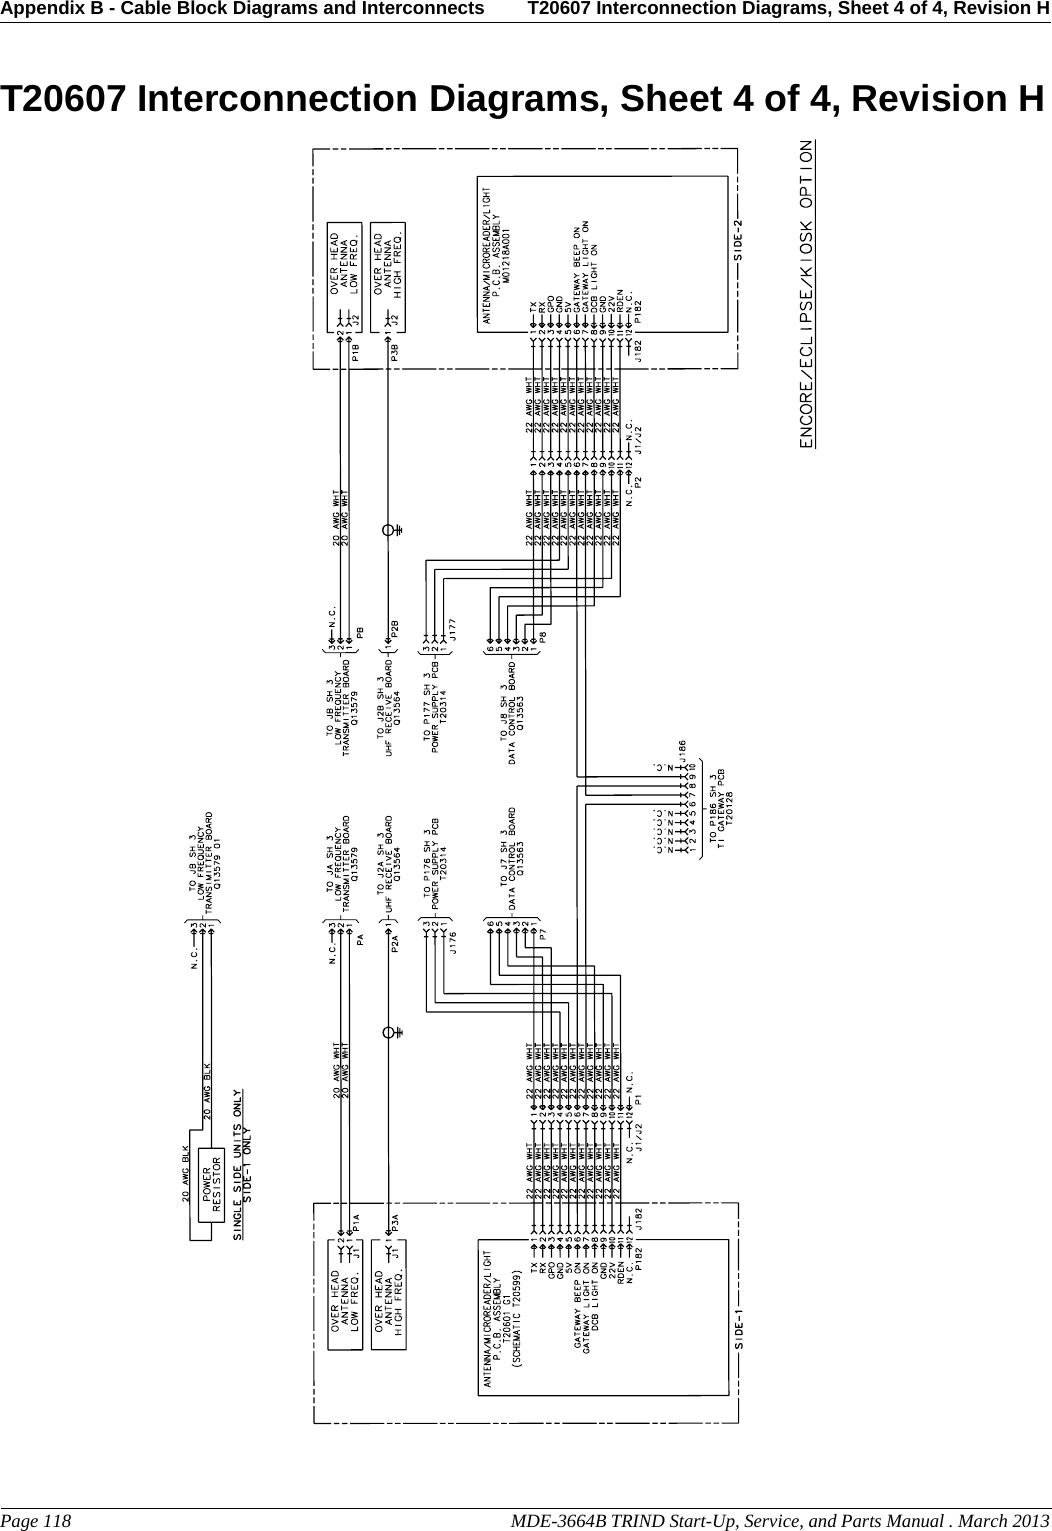 Appendix B - Cable Block Diagrams and Interconnects T20607 Interconnection Diagrams, Sheet 4 of 4, Revision HPage 118                                                                                                  MDE-3664B TRIND Start-Up, Service, and Parts Manual . March 2013PreliminaryT20607 Interconnection Diagrams, Sheet 4 of 4, Revision H